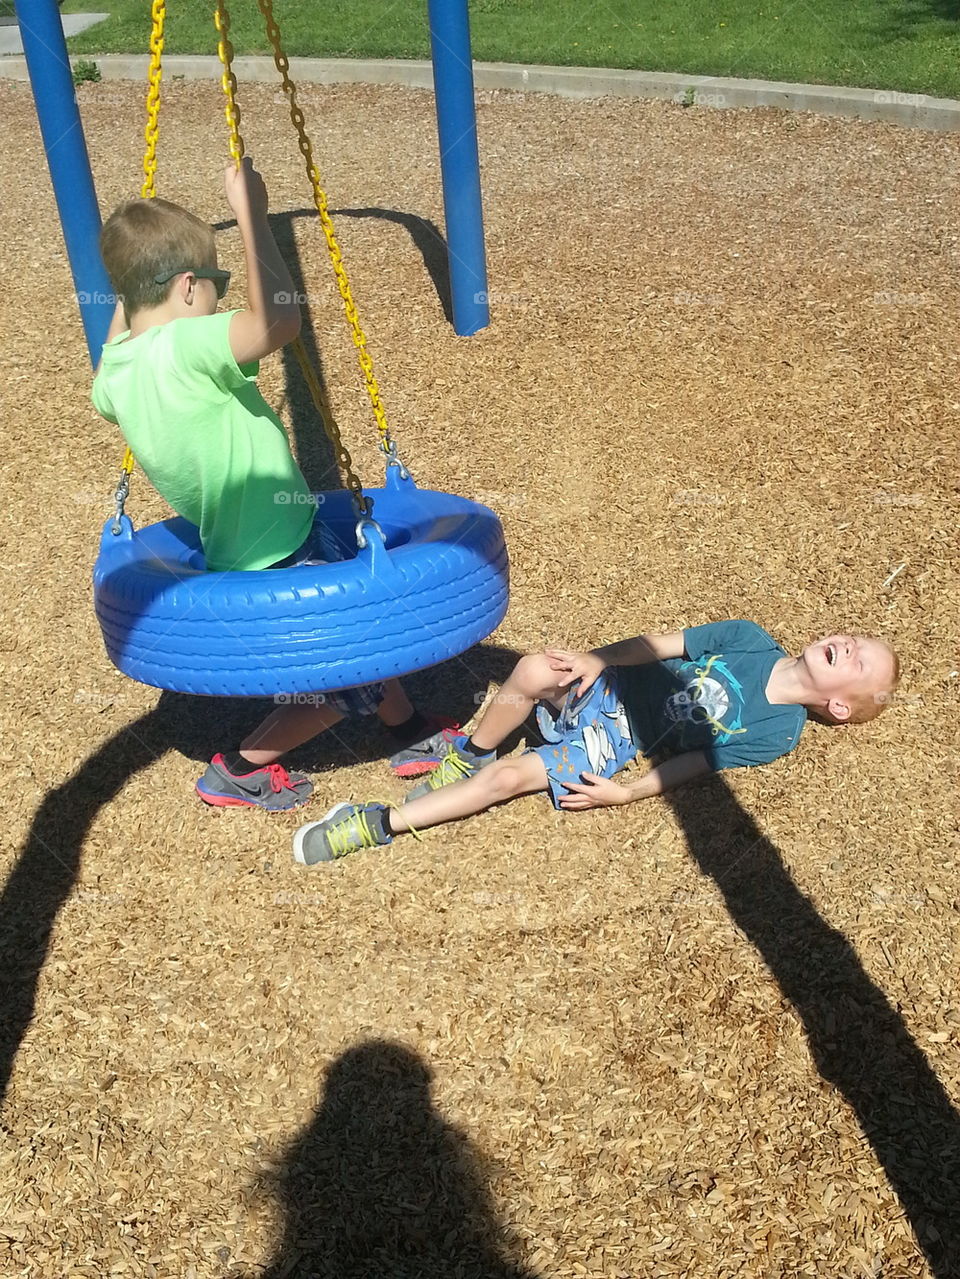 Playing on the tire swing